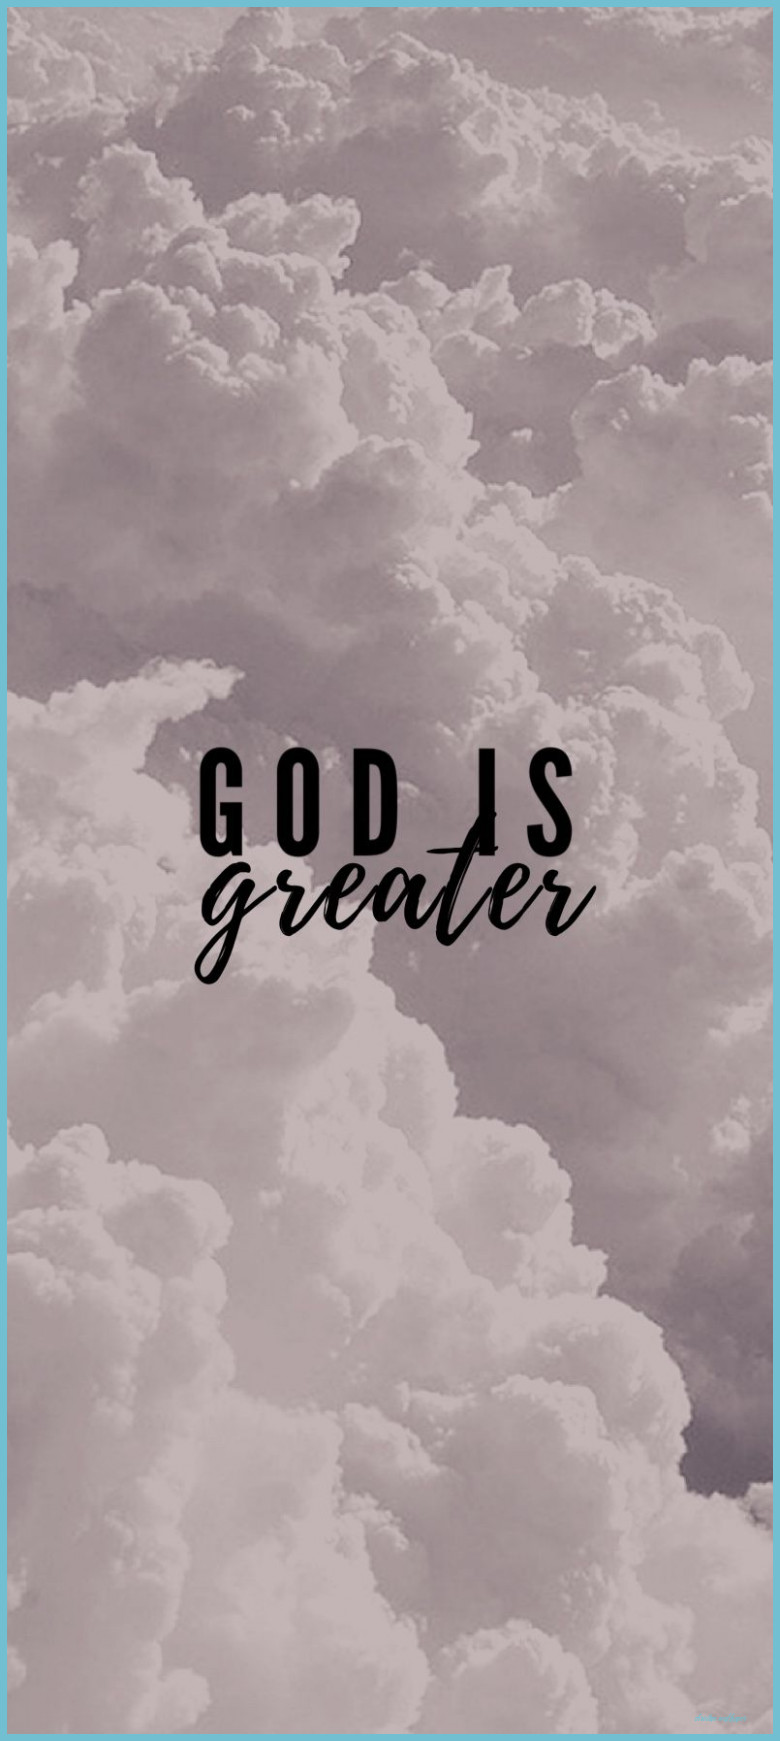 Digital Art Christian phone Background Artwork for Phone wallpaper Andriod Background INSTANT DOWNLOAD iPhone Background